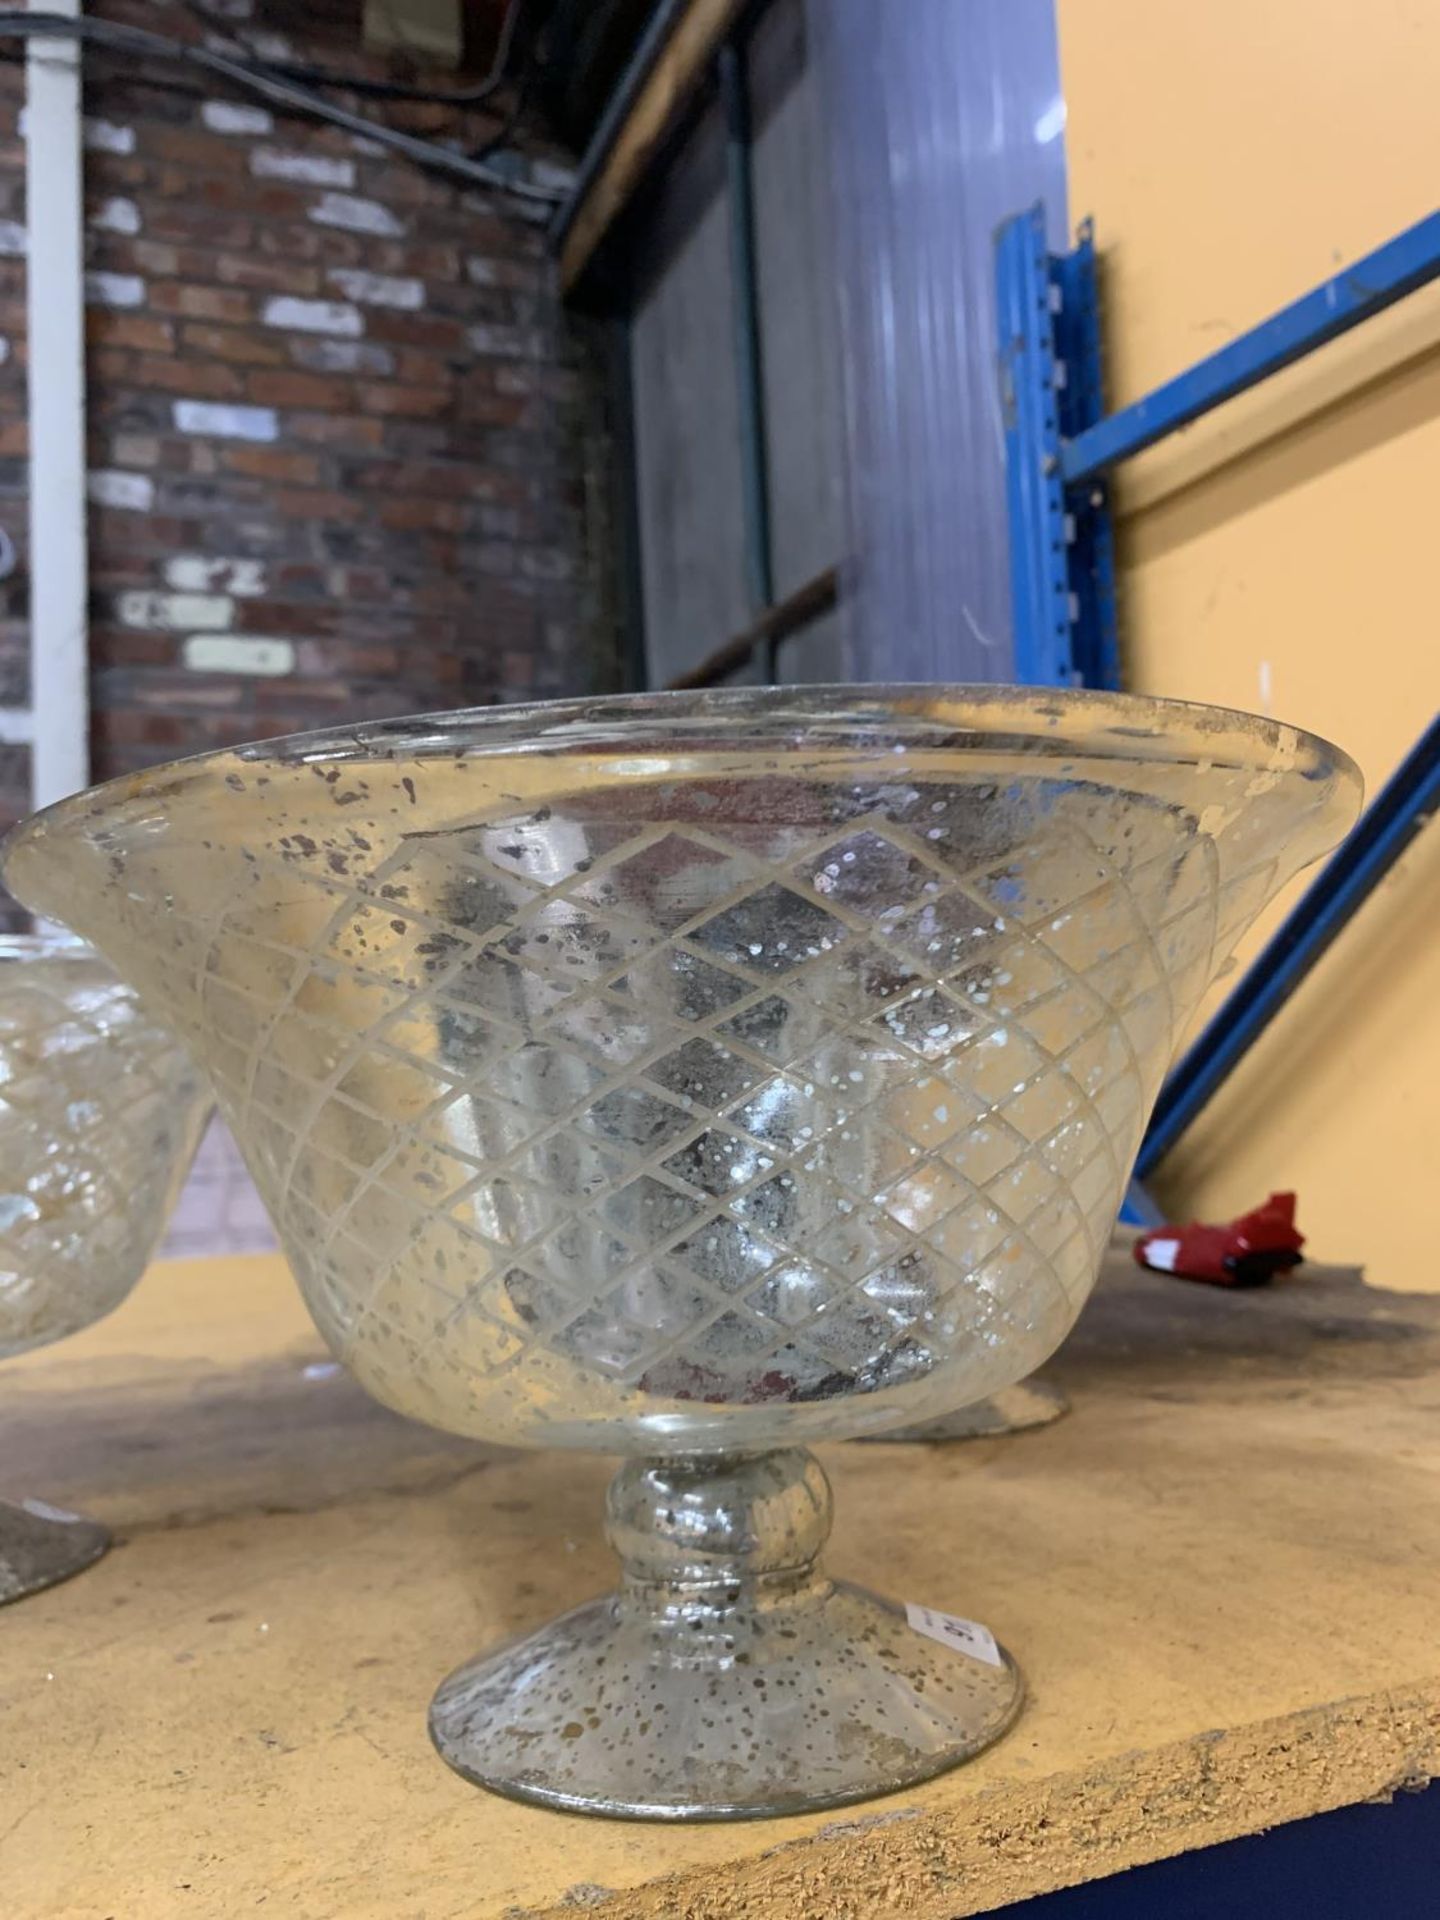 THREE LARGE GLASS FOOTED BOWLS - Image 2 of 3